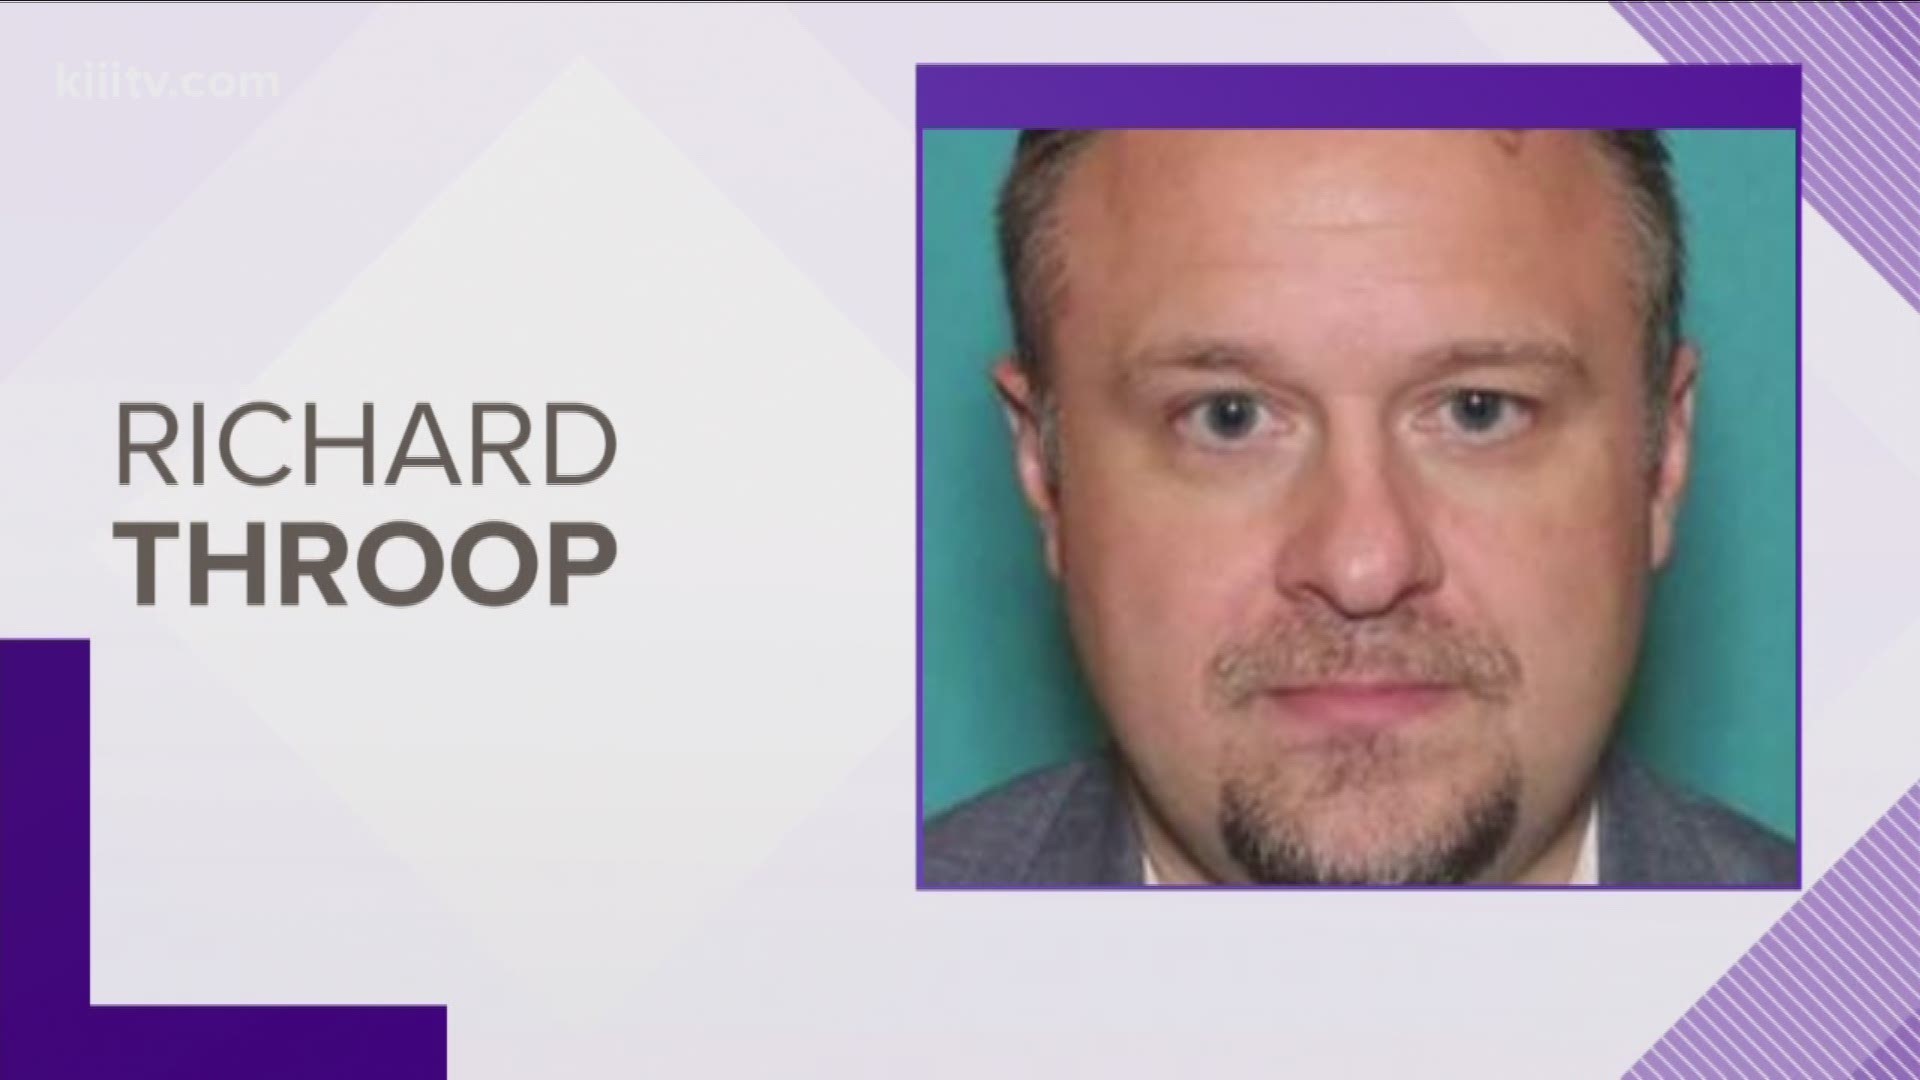 41-year-old Richard Throop was last seen at 7:30 a.m. Tuesday.